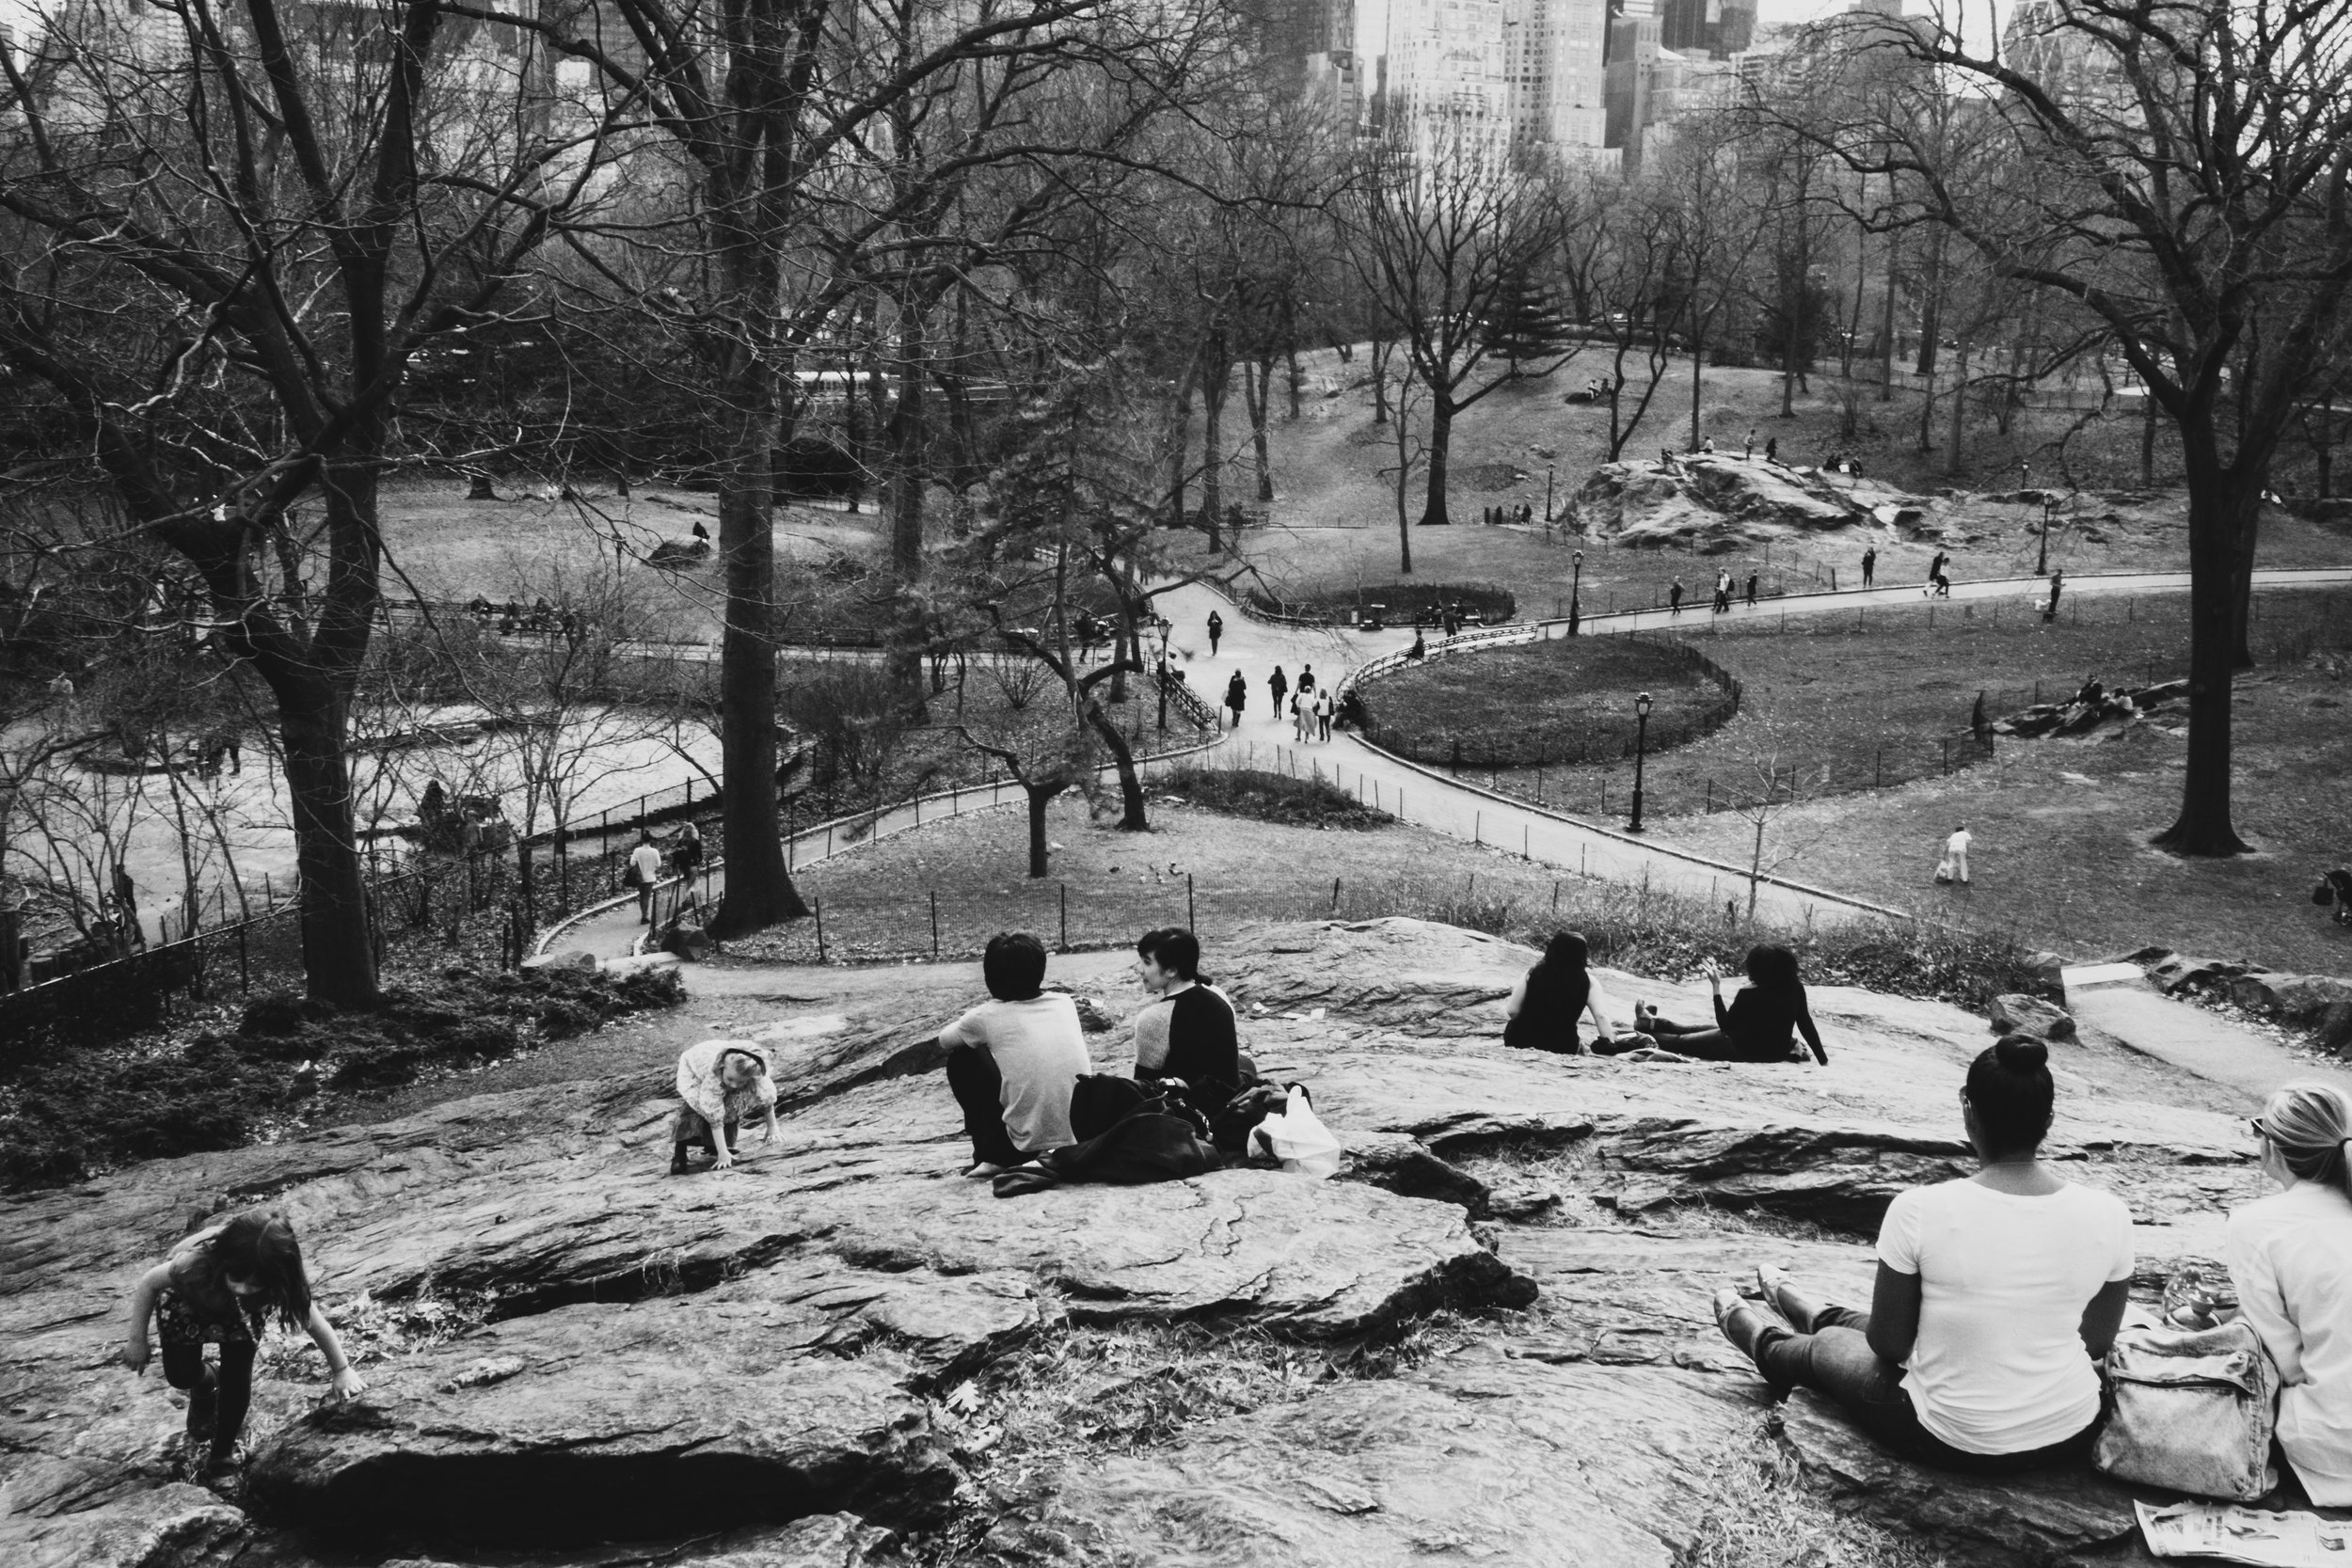 The Umpire Rock at Central Park, New York